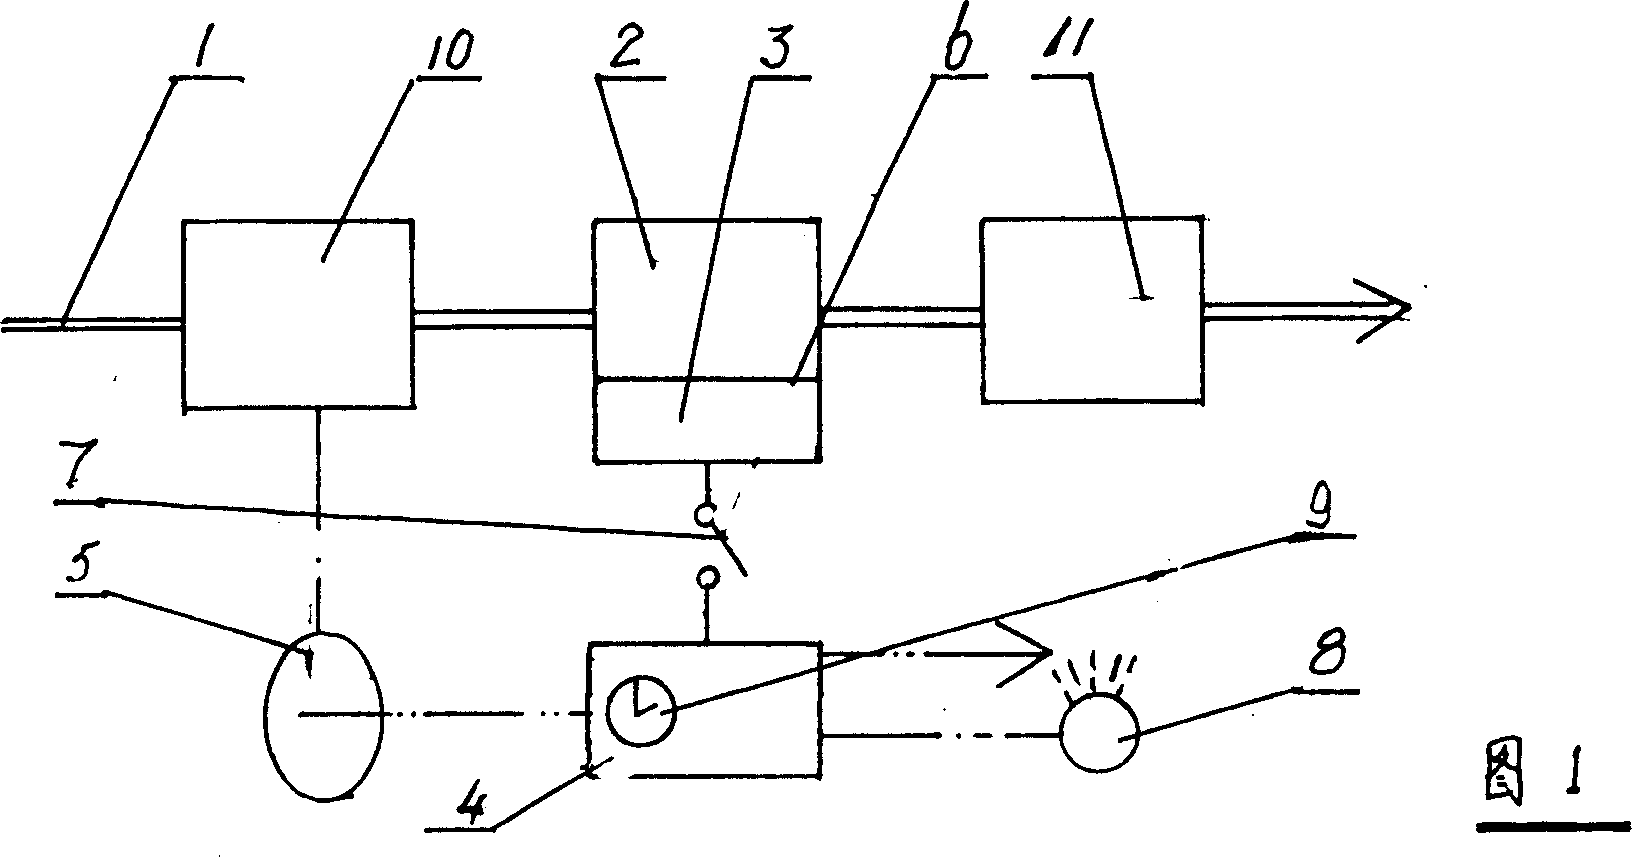 Flexible measuring method according to space information and time parameter